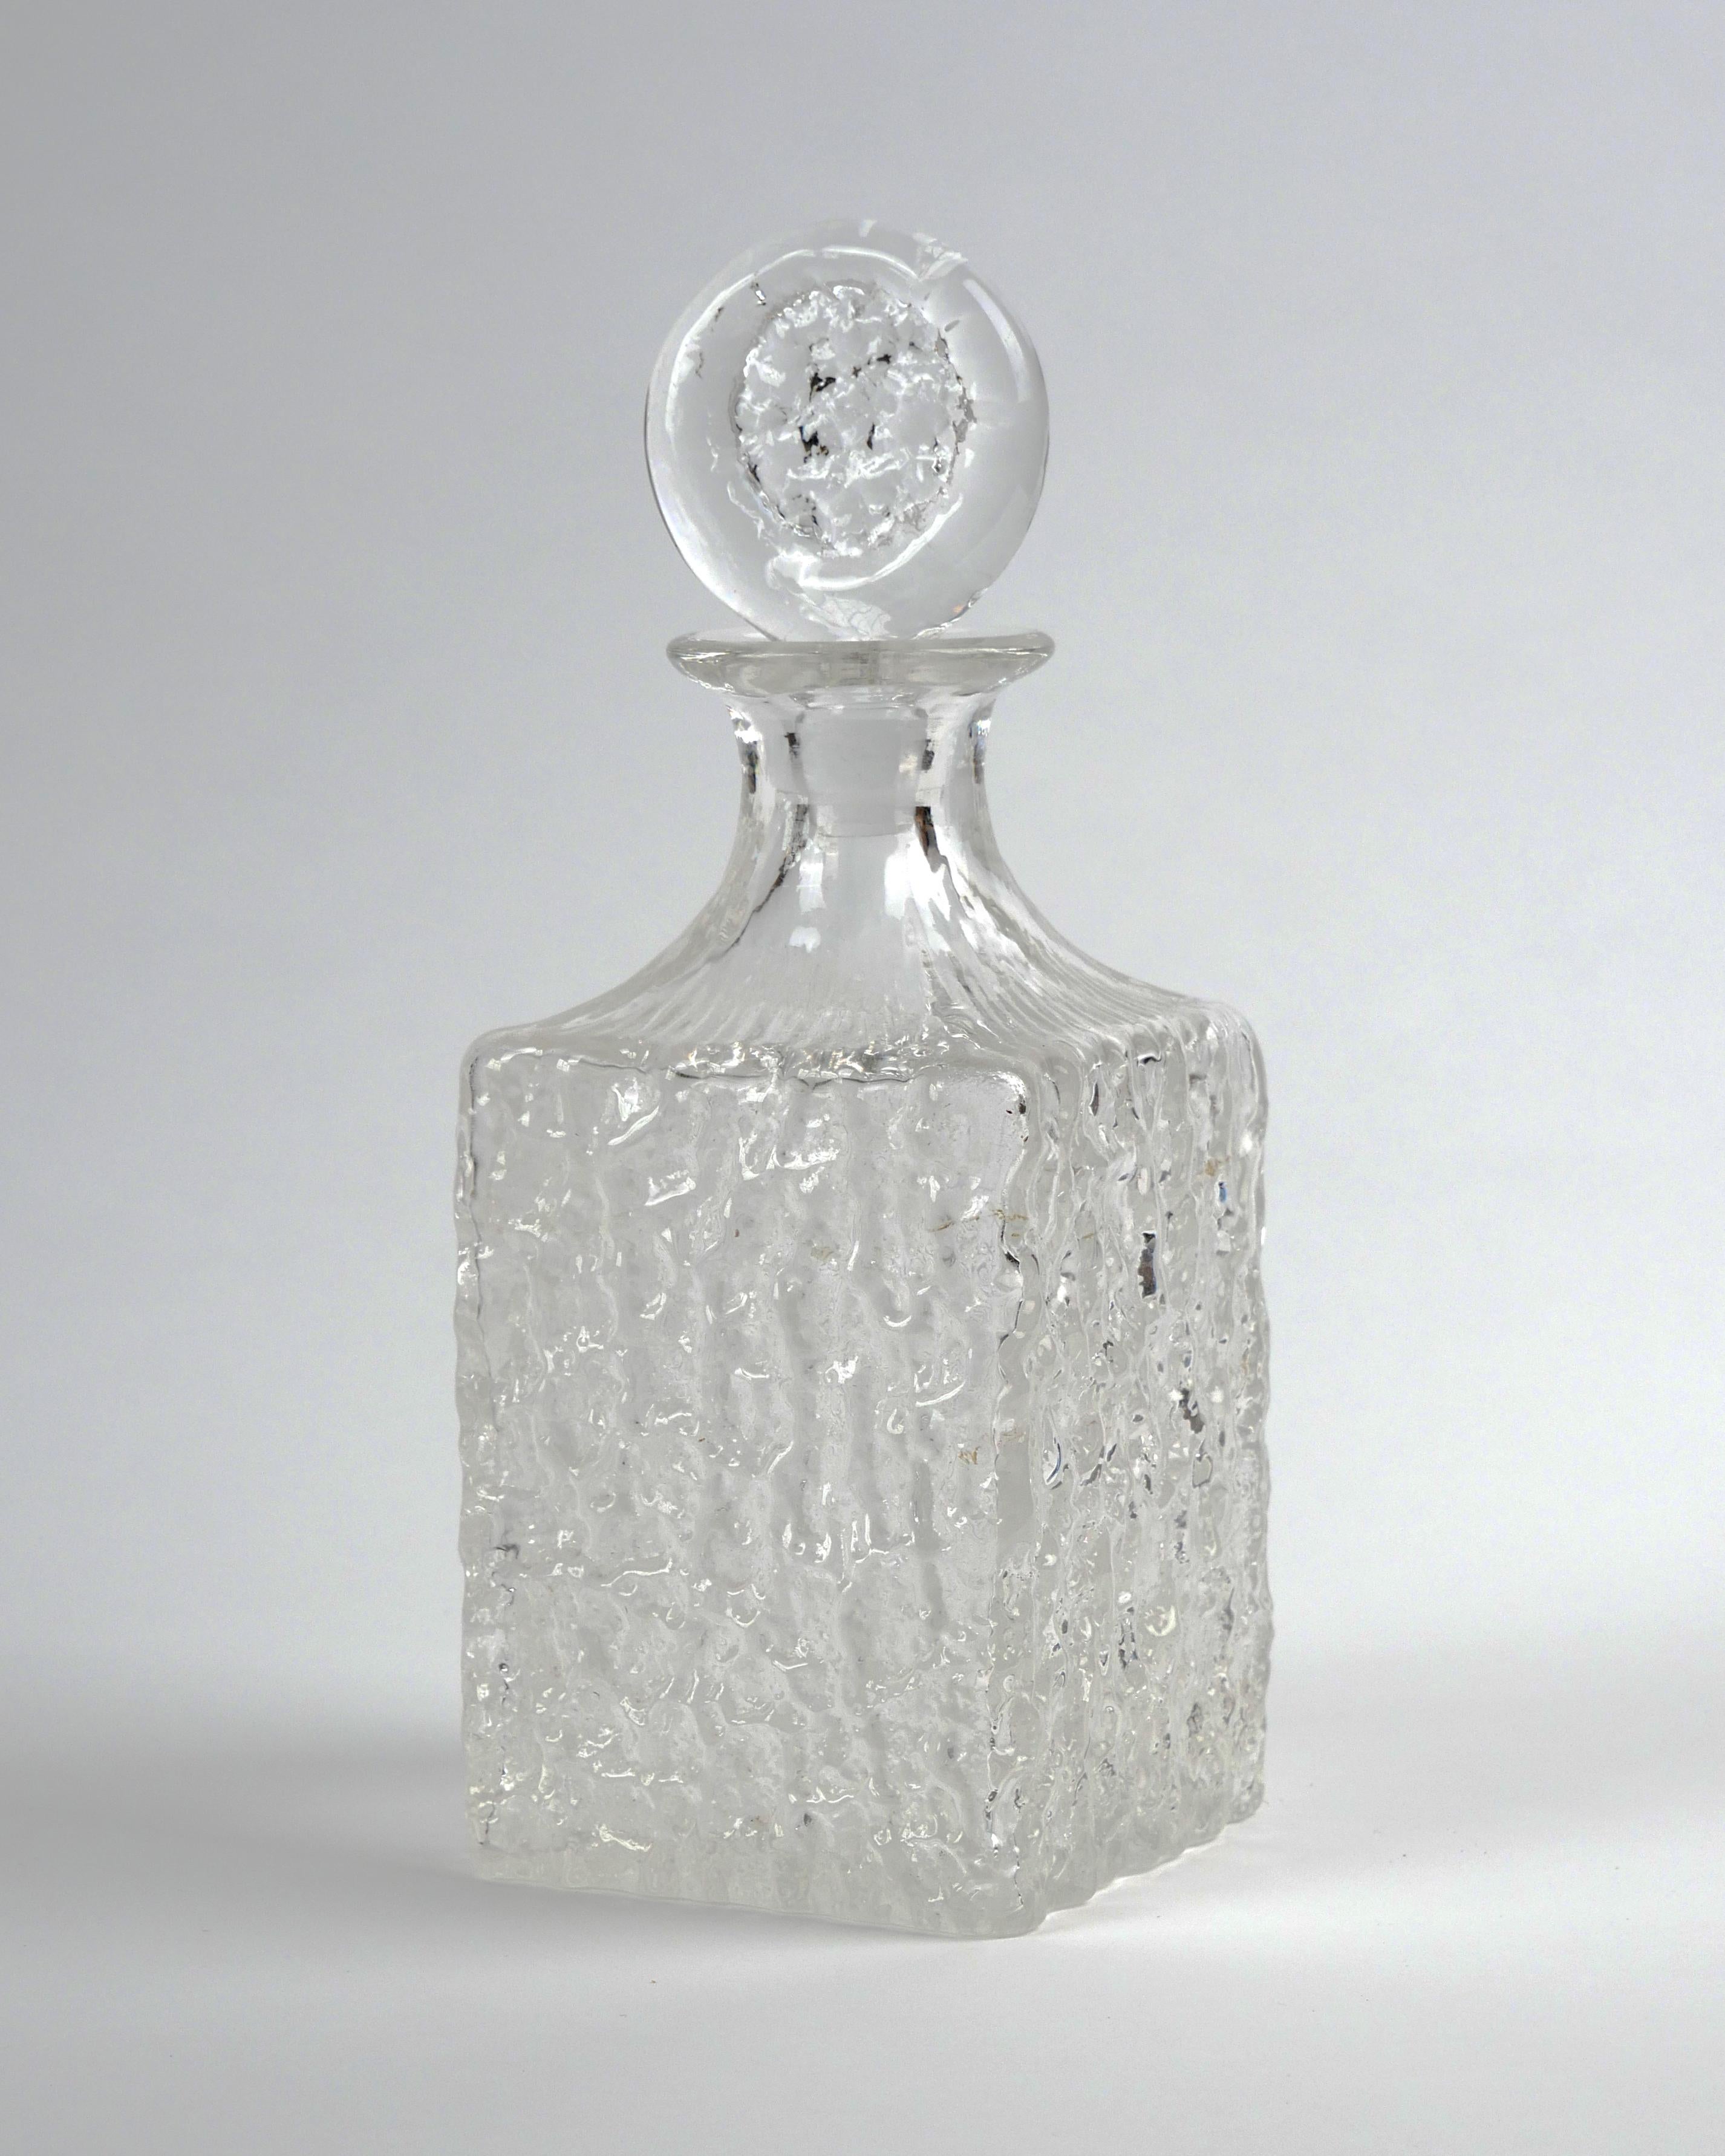 Geoffrey Baxter for Whitefriars, c. 1960s
Decanter from the 'Glacier’ range, model number 9725
Clear textured glass
Excellent condition without damage

Dimensions (approx.): width 10cm, depth 10cm, height 20cm/27cm; weight: 1200g.